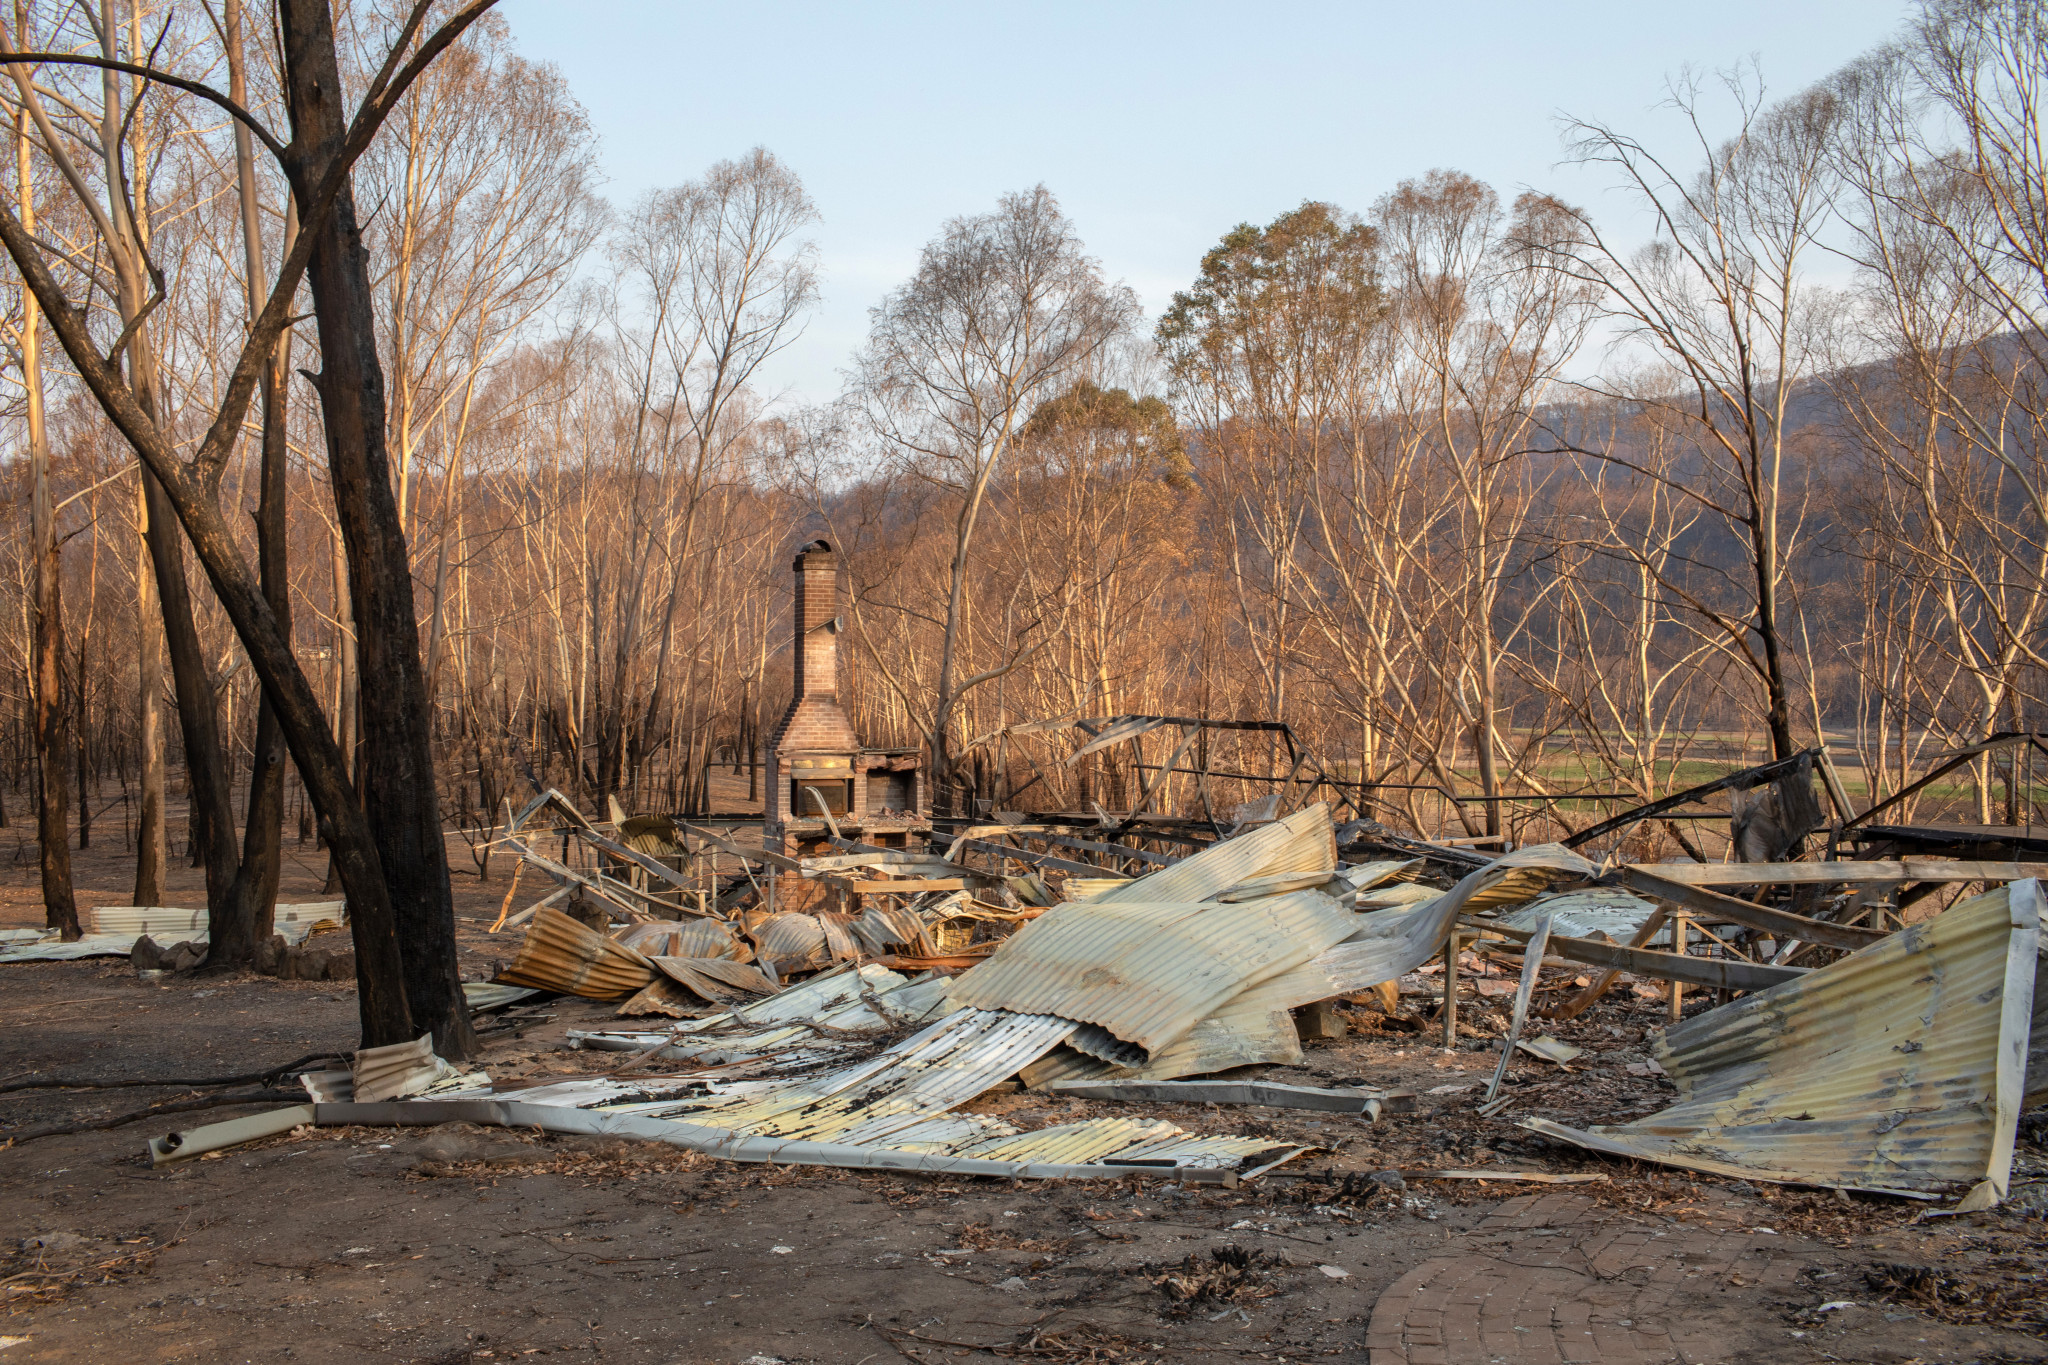 Bushfires devastated large areas and communities in Australia ©Getty Images 